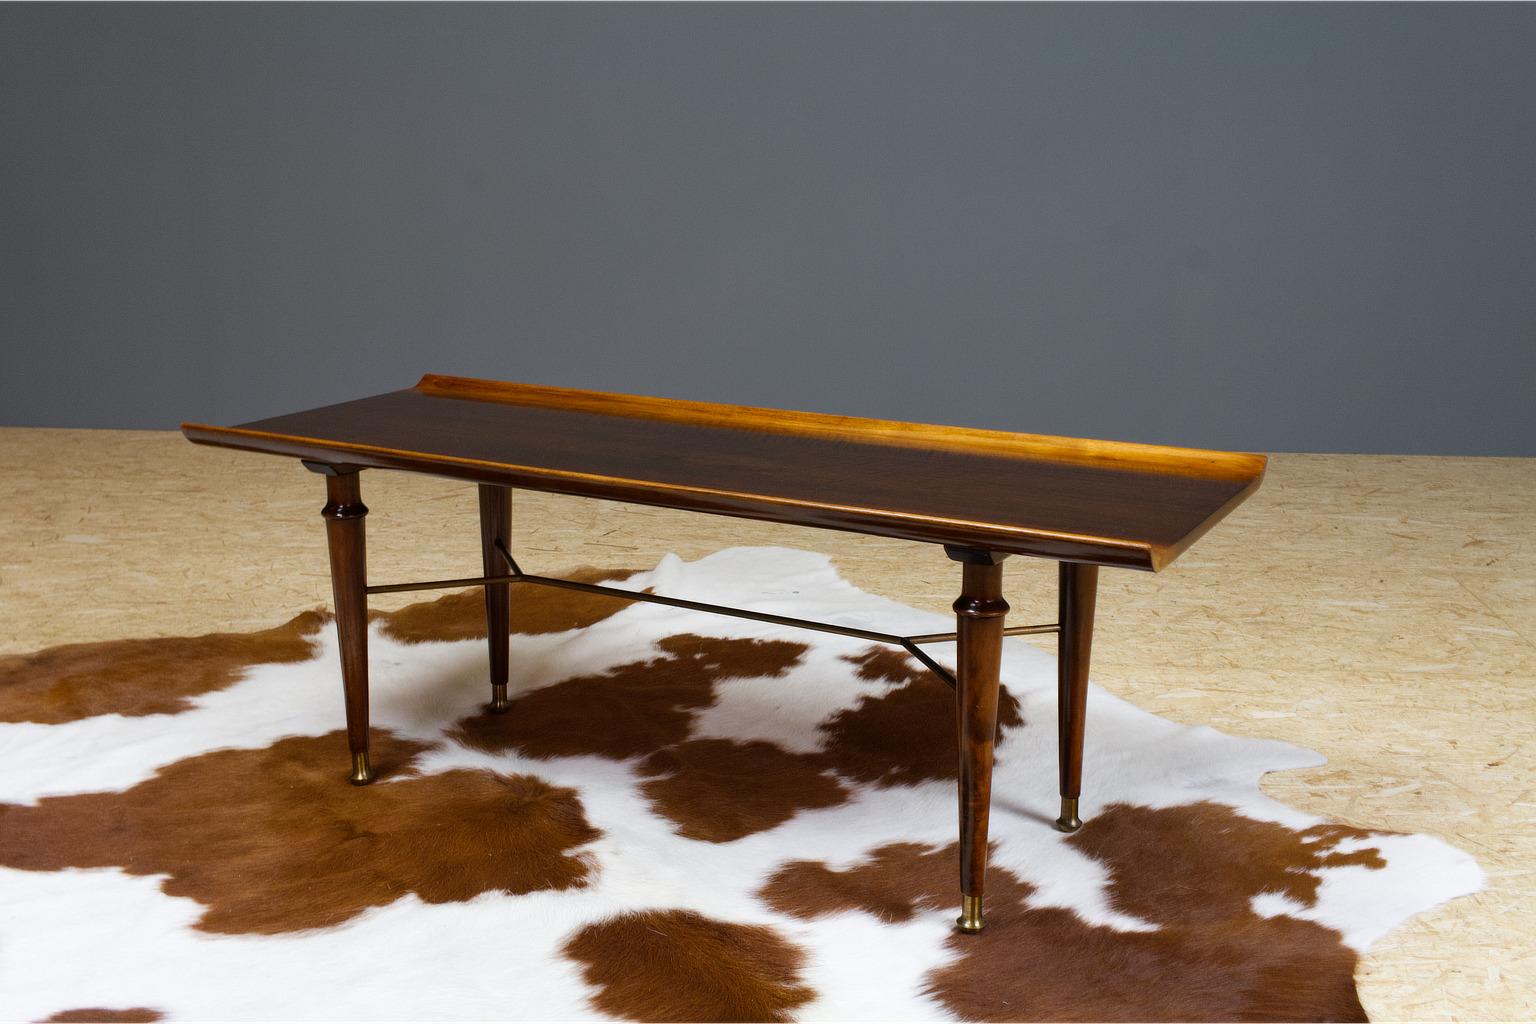 Slender mahogany coffee table from the Poly-Z serie, designed by Abraham Patijn (during the late 1950s) for Dutch manufacturer Zijlstra. Patijn was a Dutch architect and designer (1922-1985) and committed to bring modern design to a wider audience.